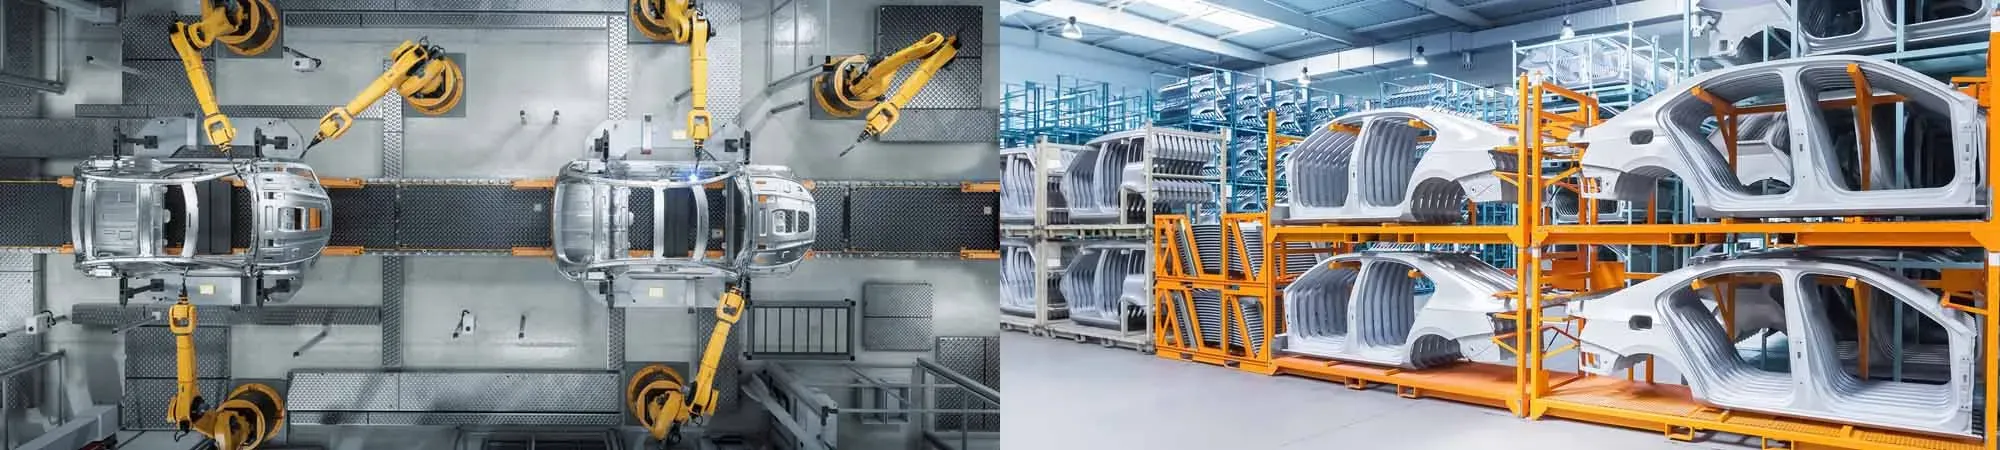 Car manufacturing line and materials handling